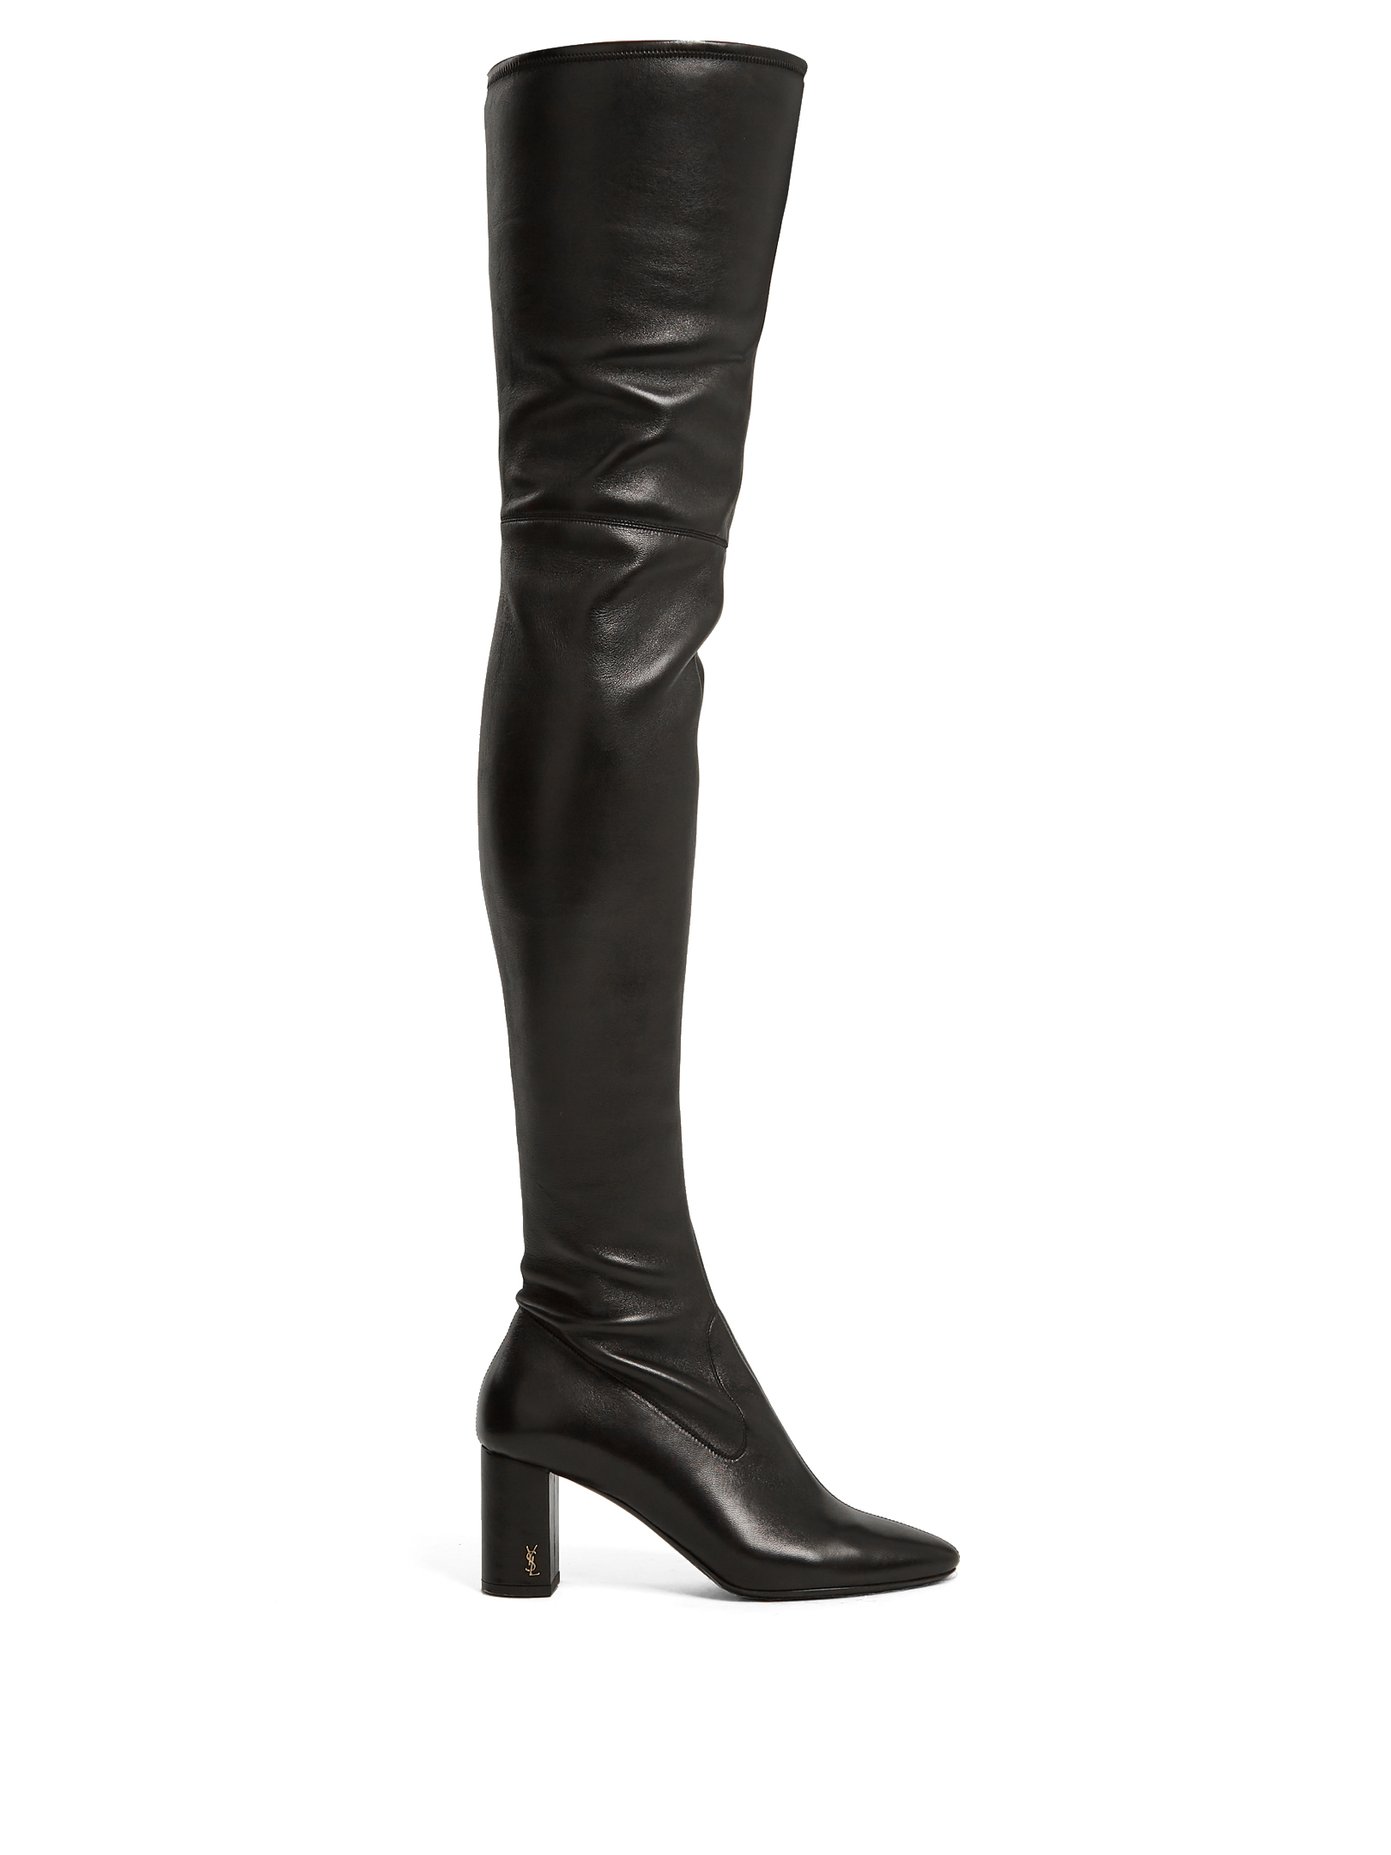 ysl loulou 7 boots